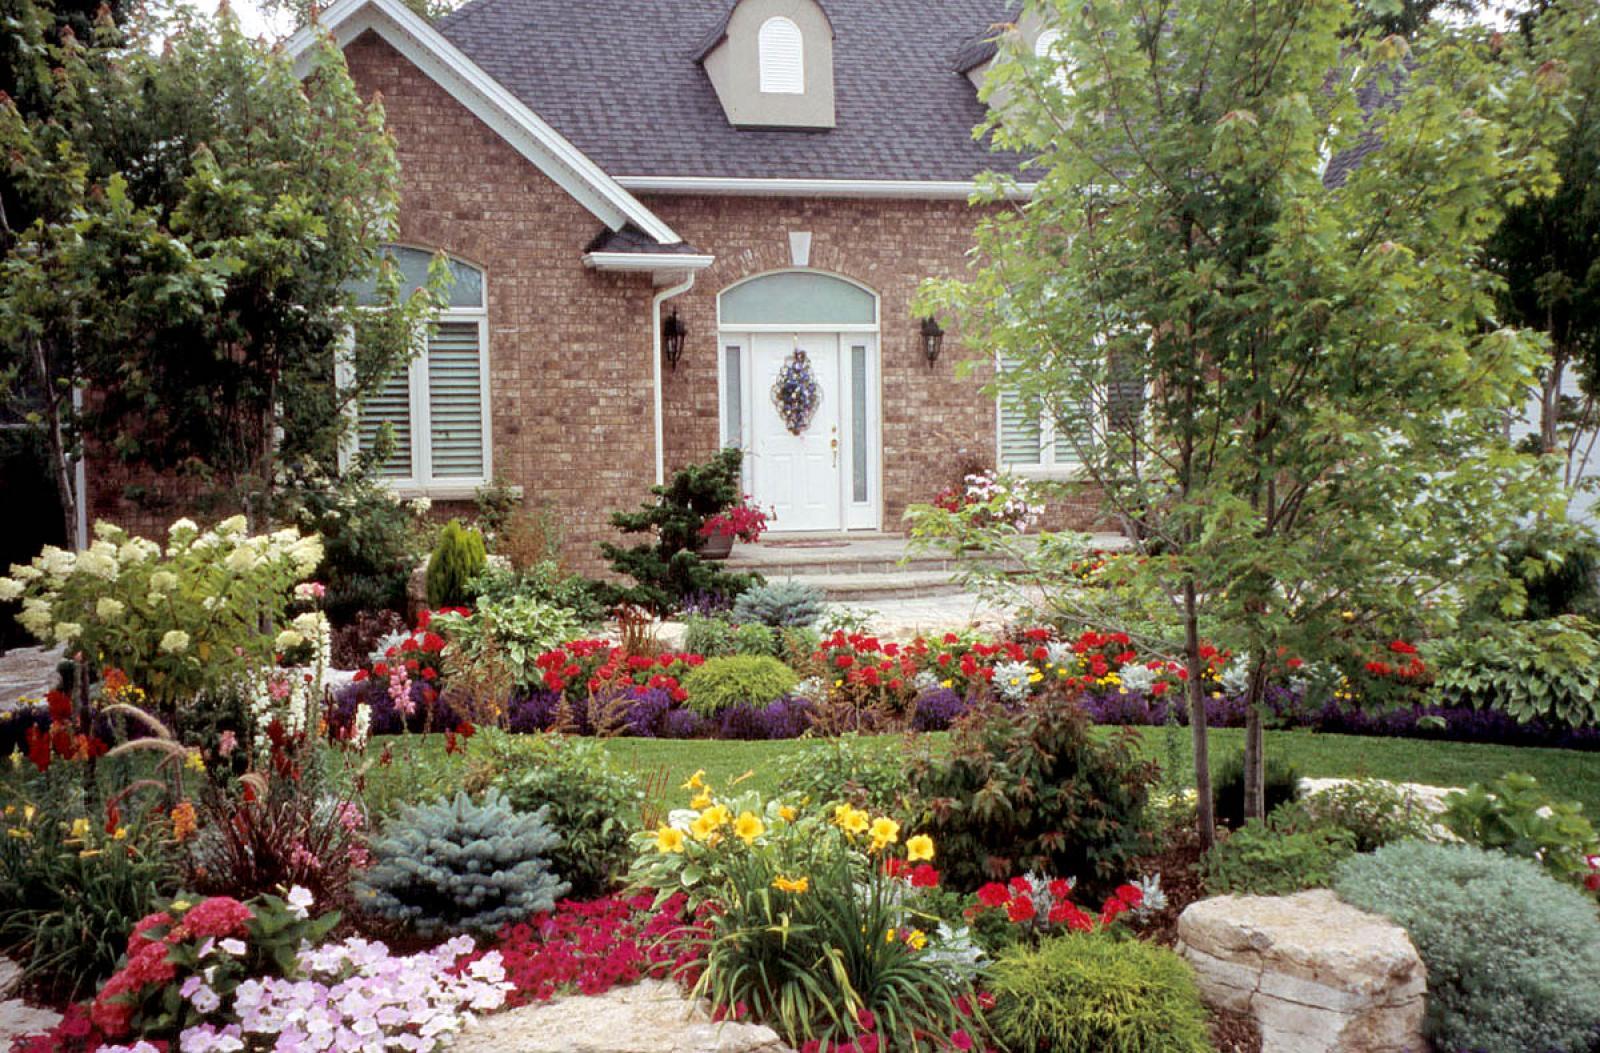 Landscaping builds equity - Landscape Ontario